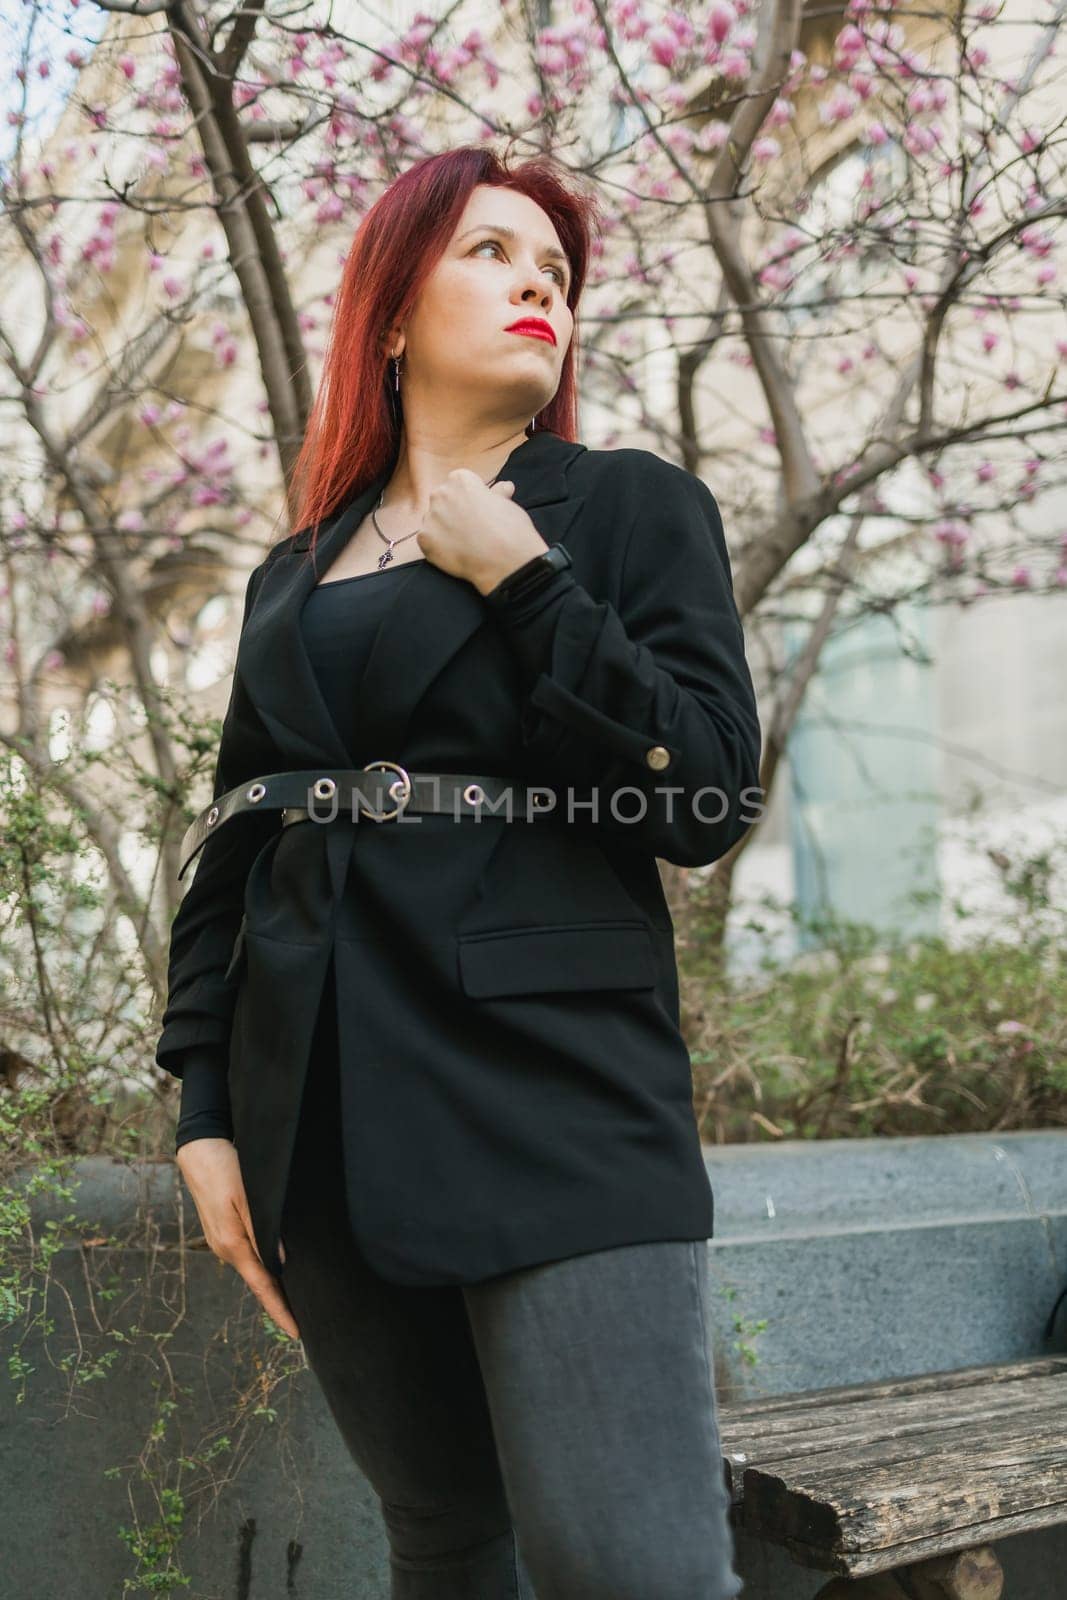 Fashion outdoor photo of beautiful woman with red curly hair in elegant suit posing in spring flowering park with magnolias tree. Copy space and empty place for advertising text by Satura86